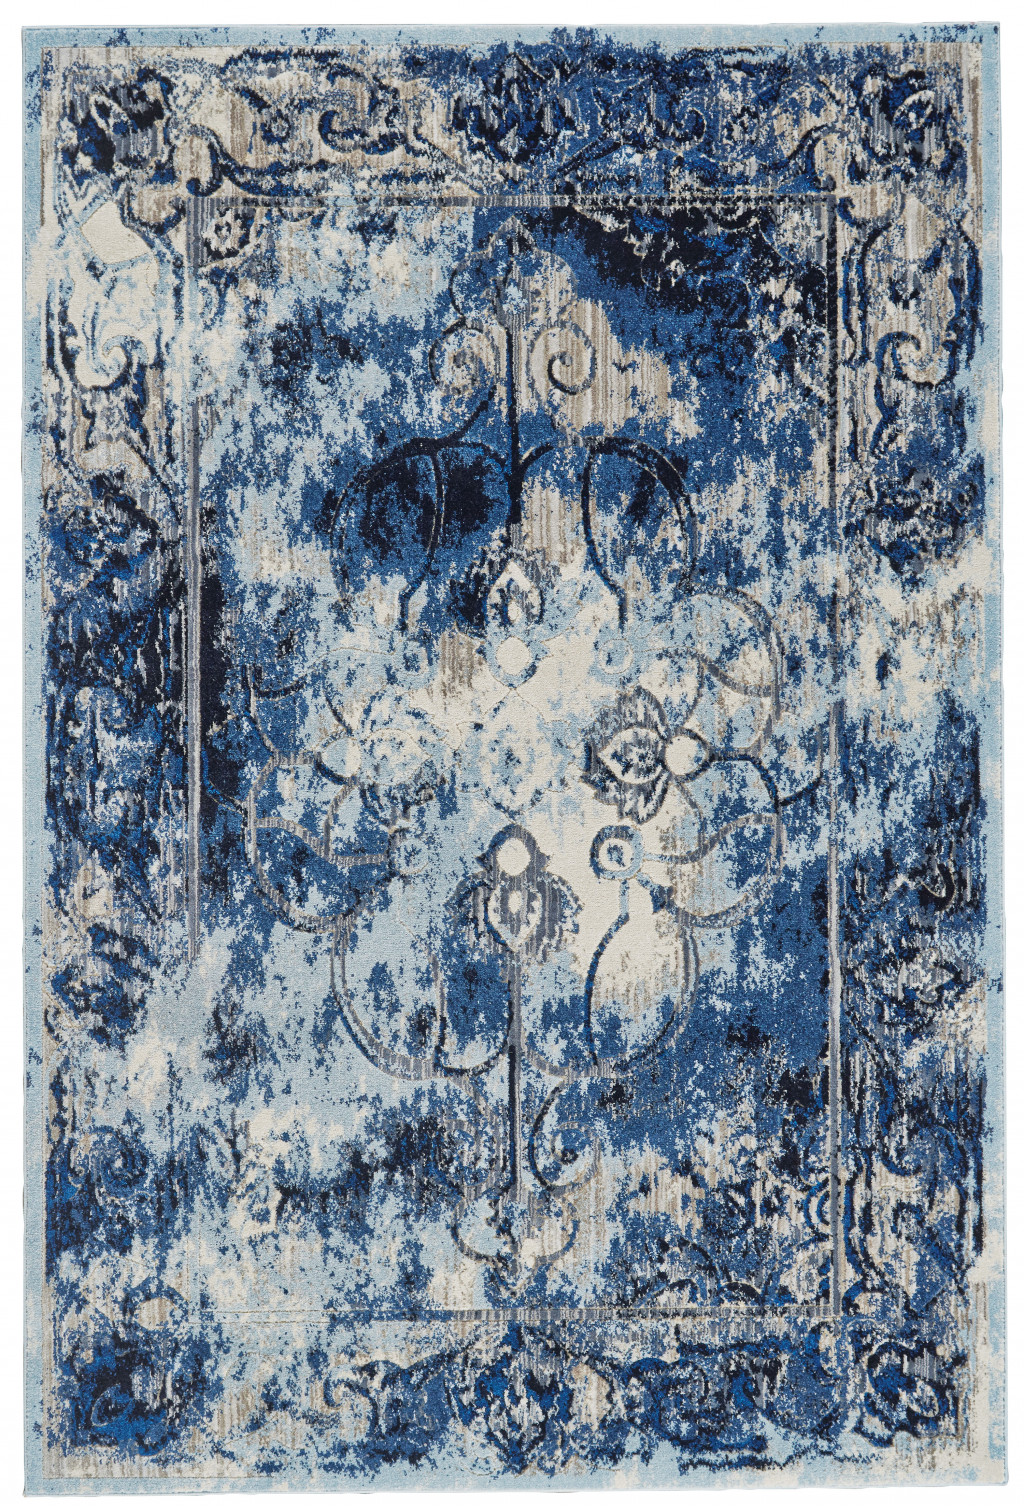 4' X 6' Blue Ivory And Gray Floral Distressed Stain Resistant Area Rug-511242-1